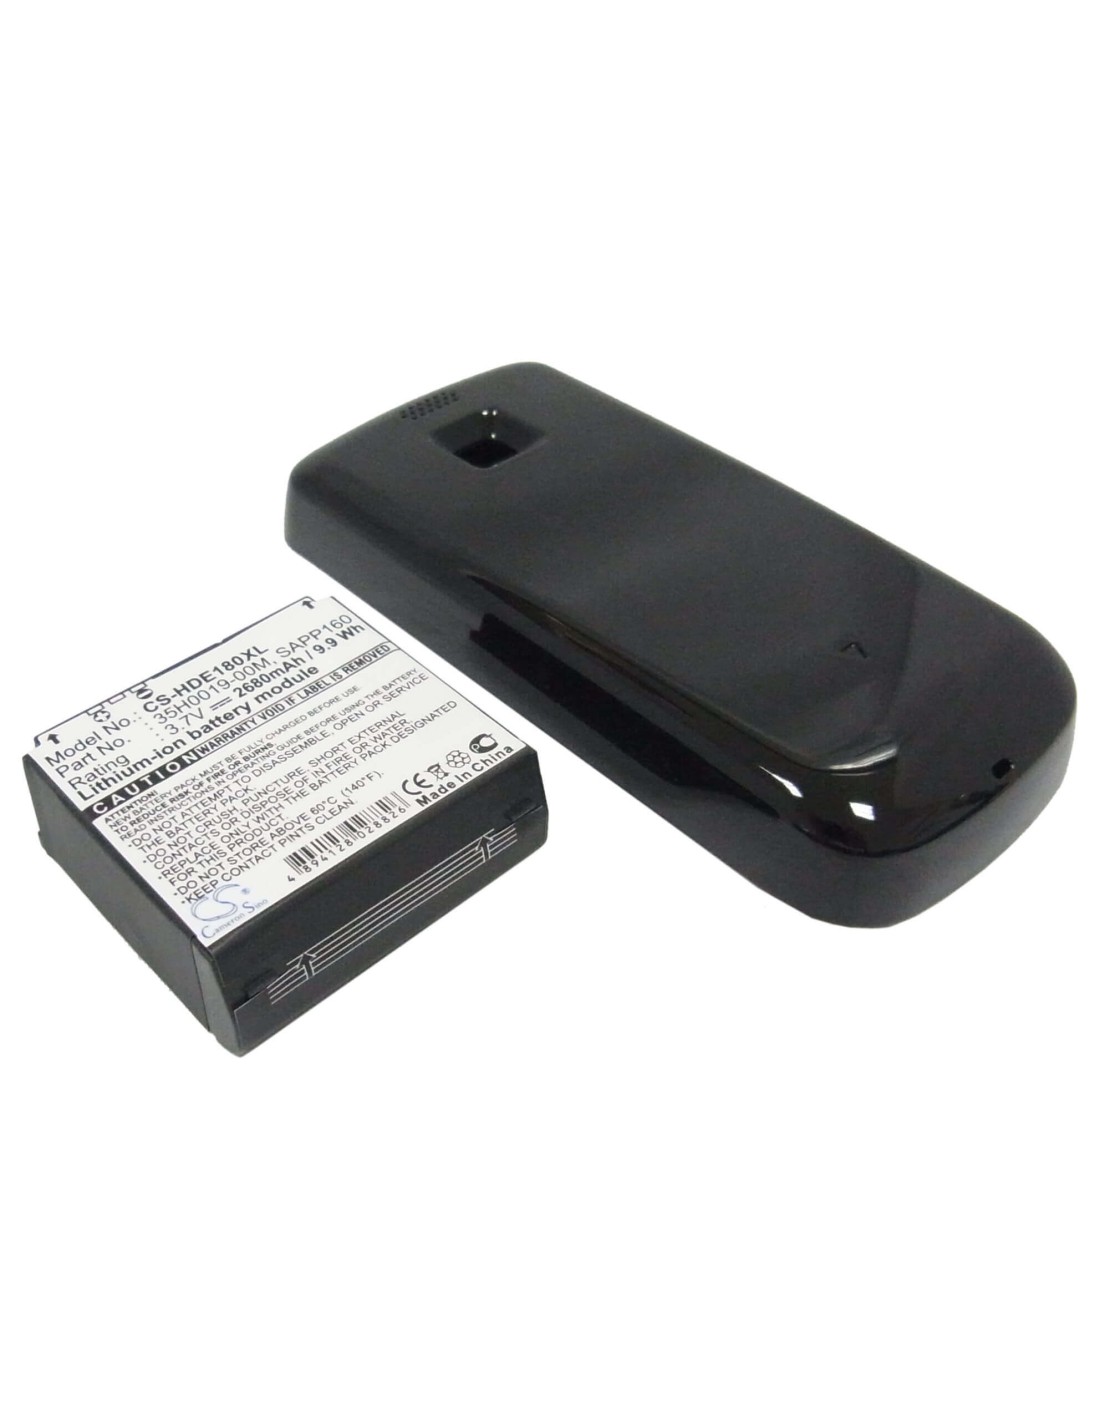 Battery for HTC Magic, A6161, Sapphire, black back cover 3.7V, 2680mAh - 9.92Wh